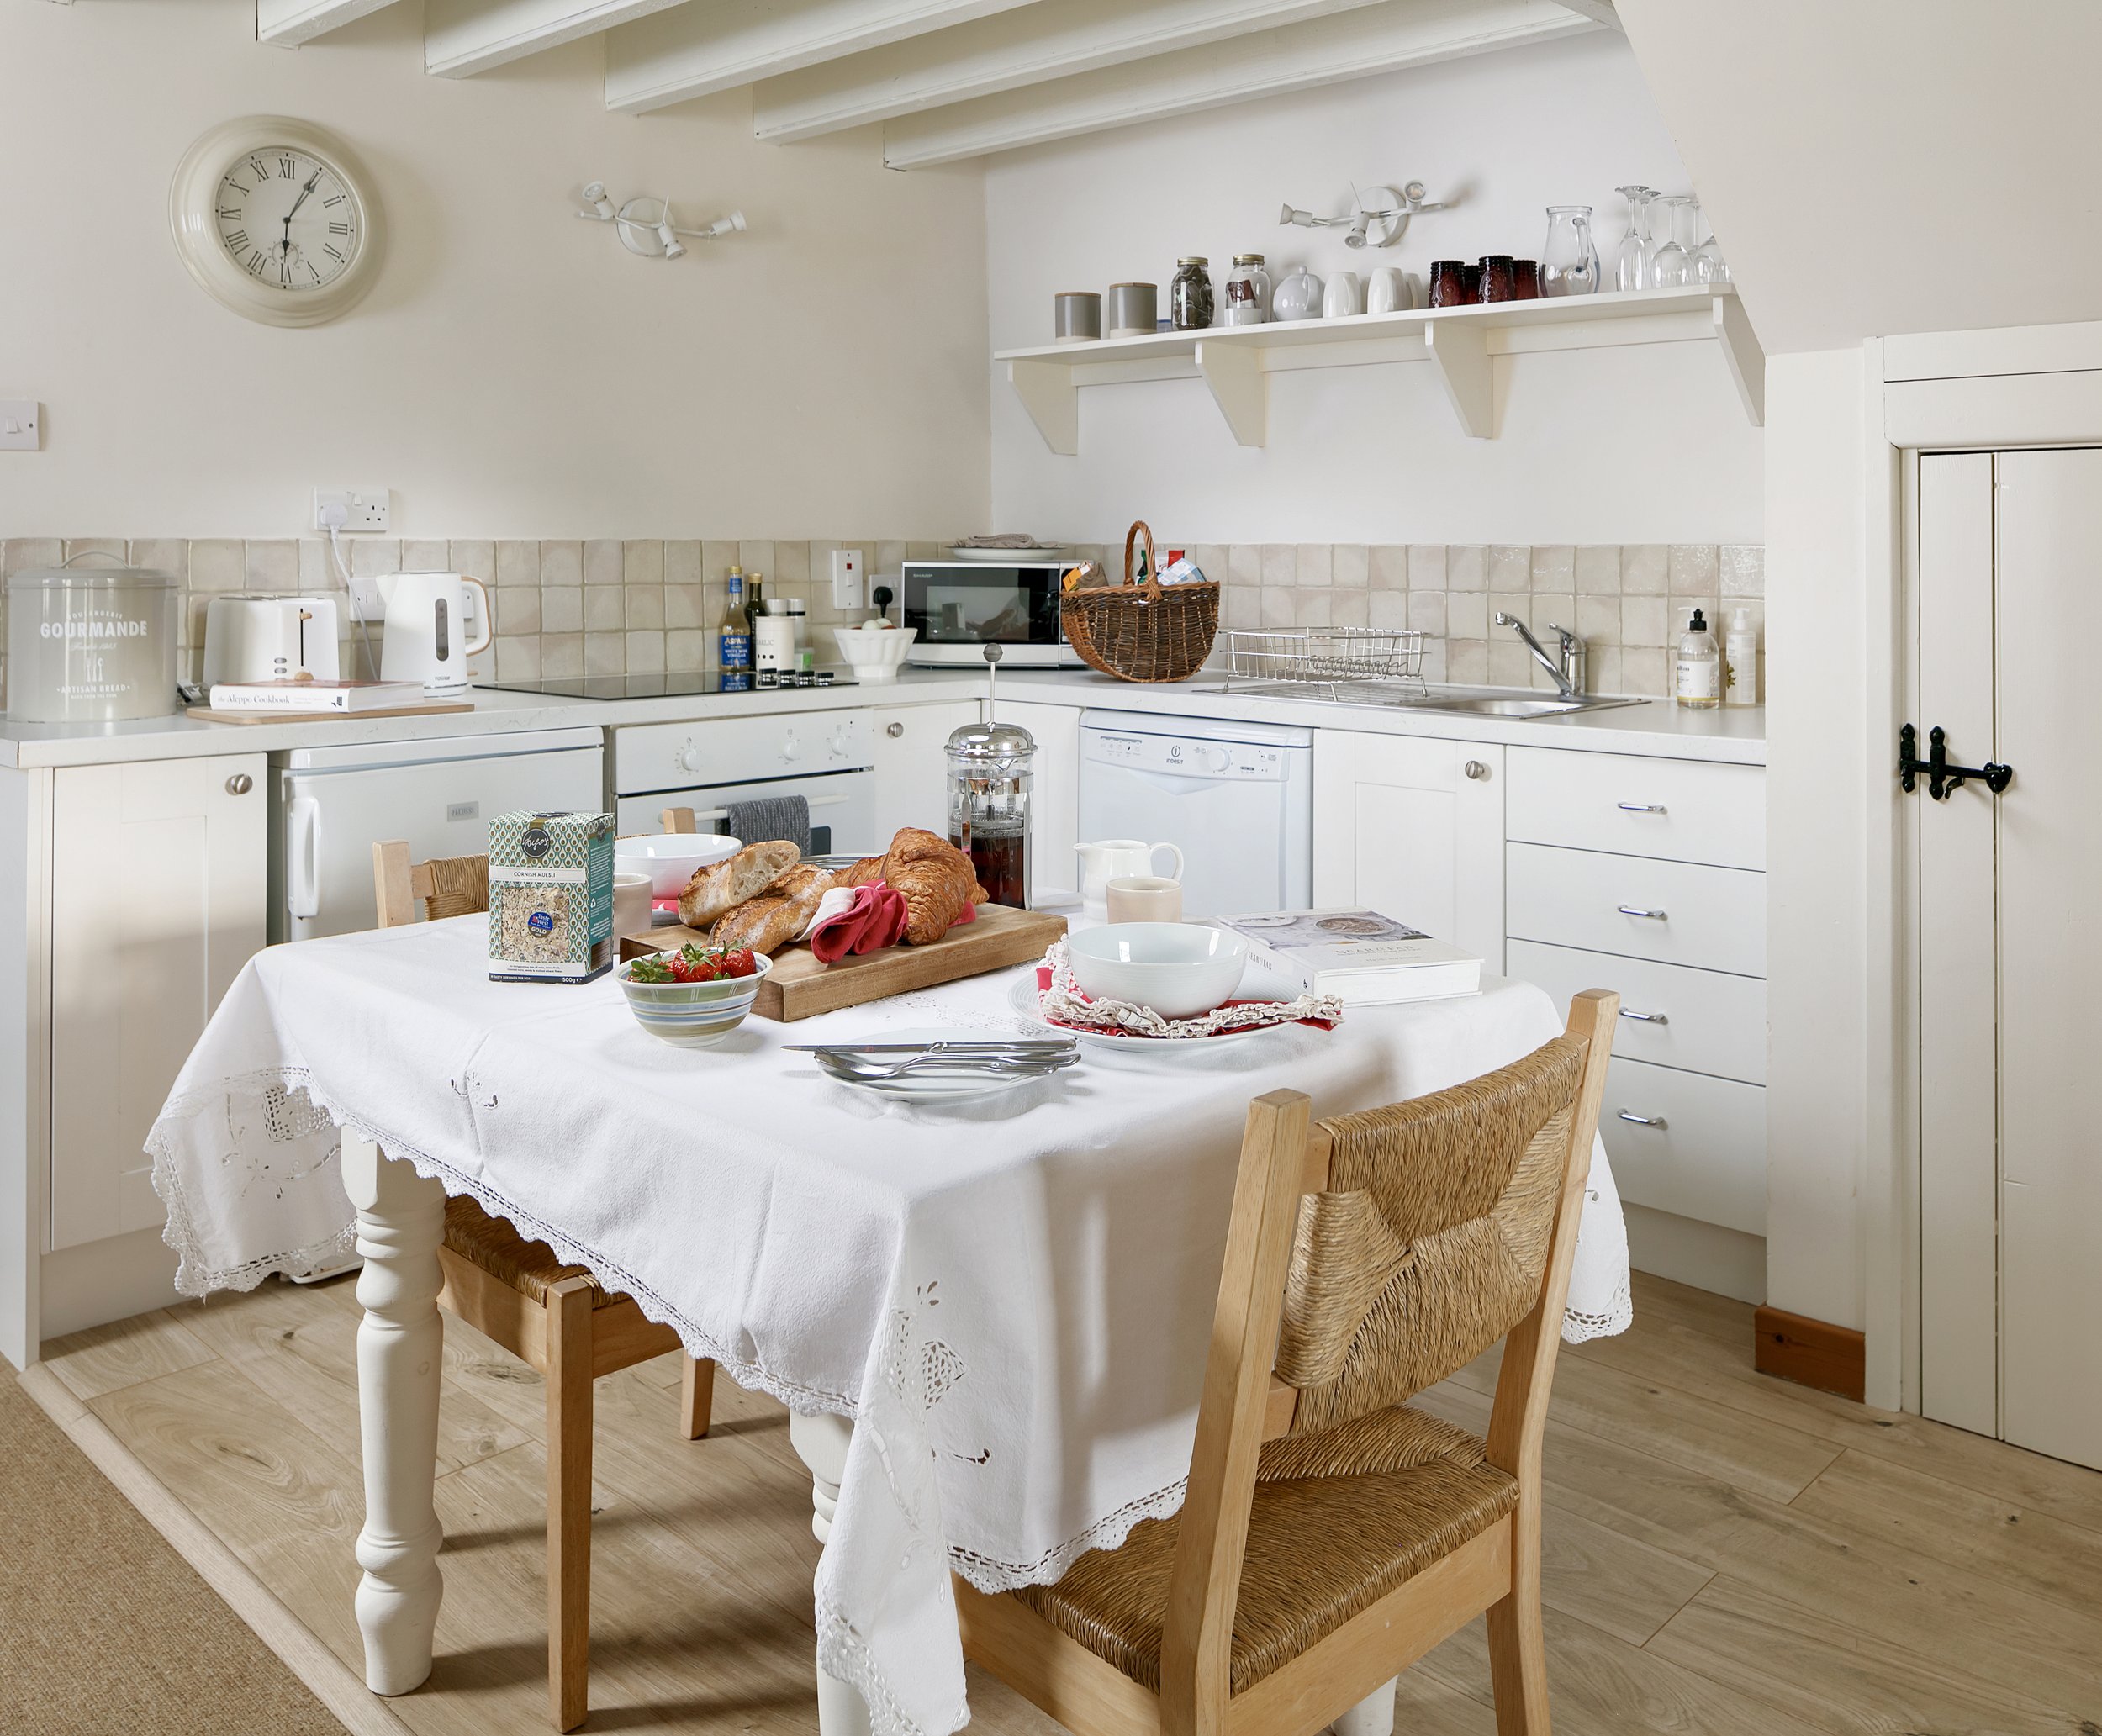 Ennys Cornwall_Well equipped Granary kitchen (Copy)